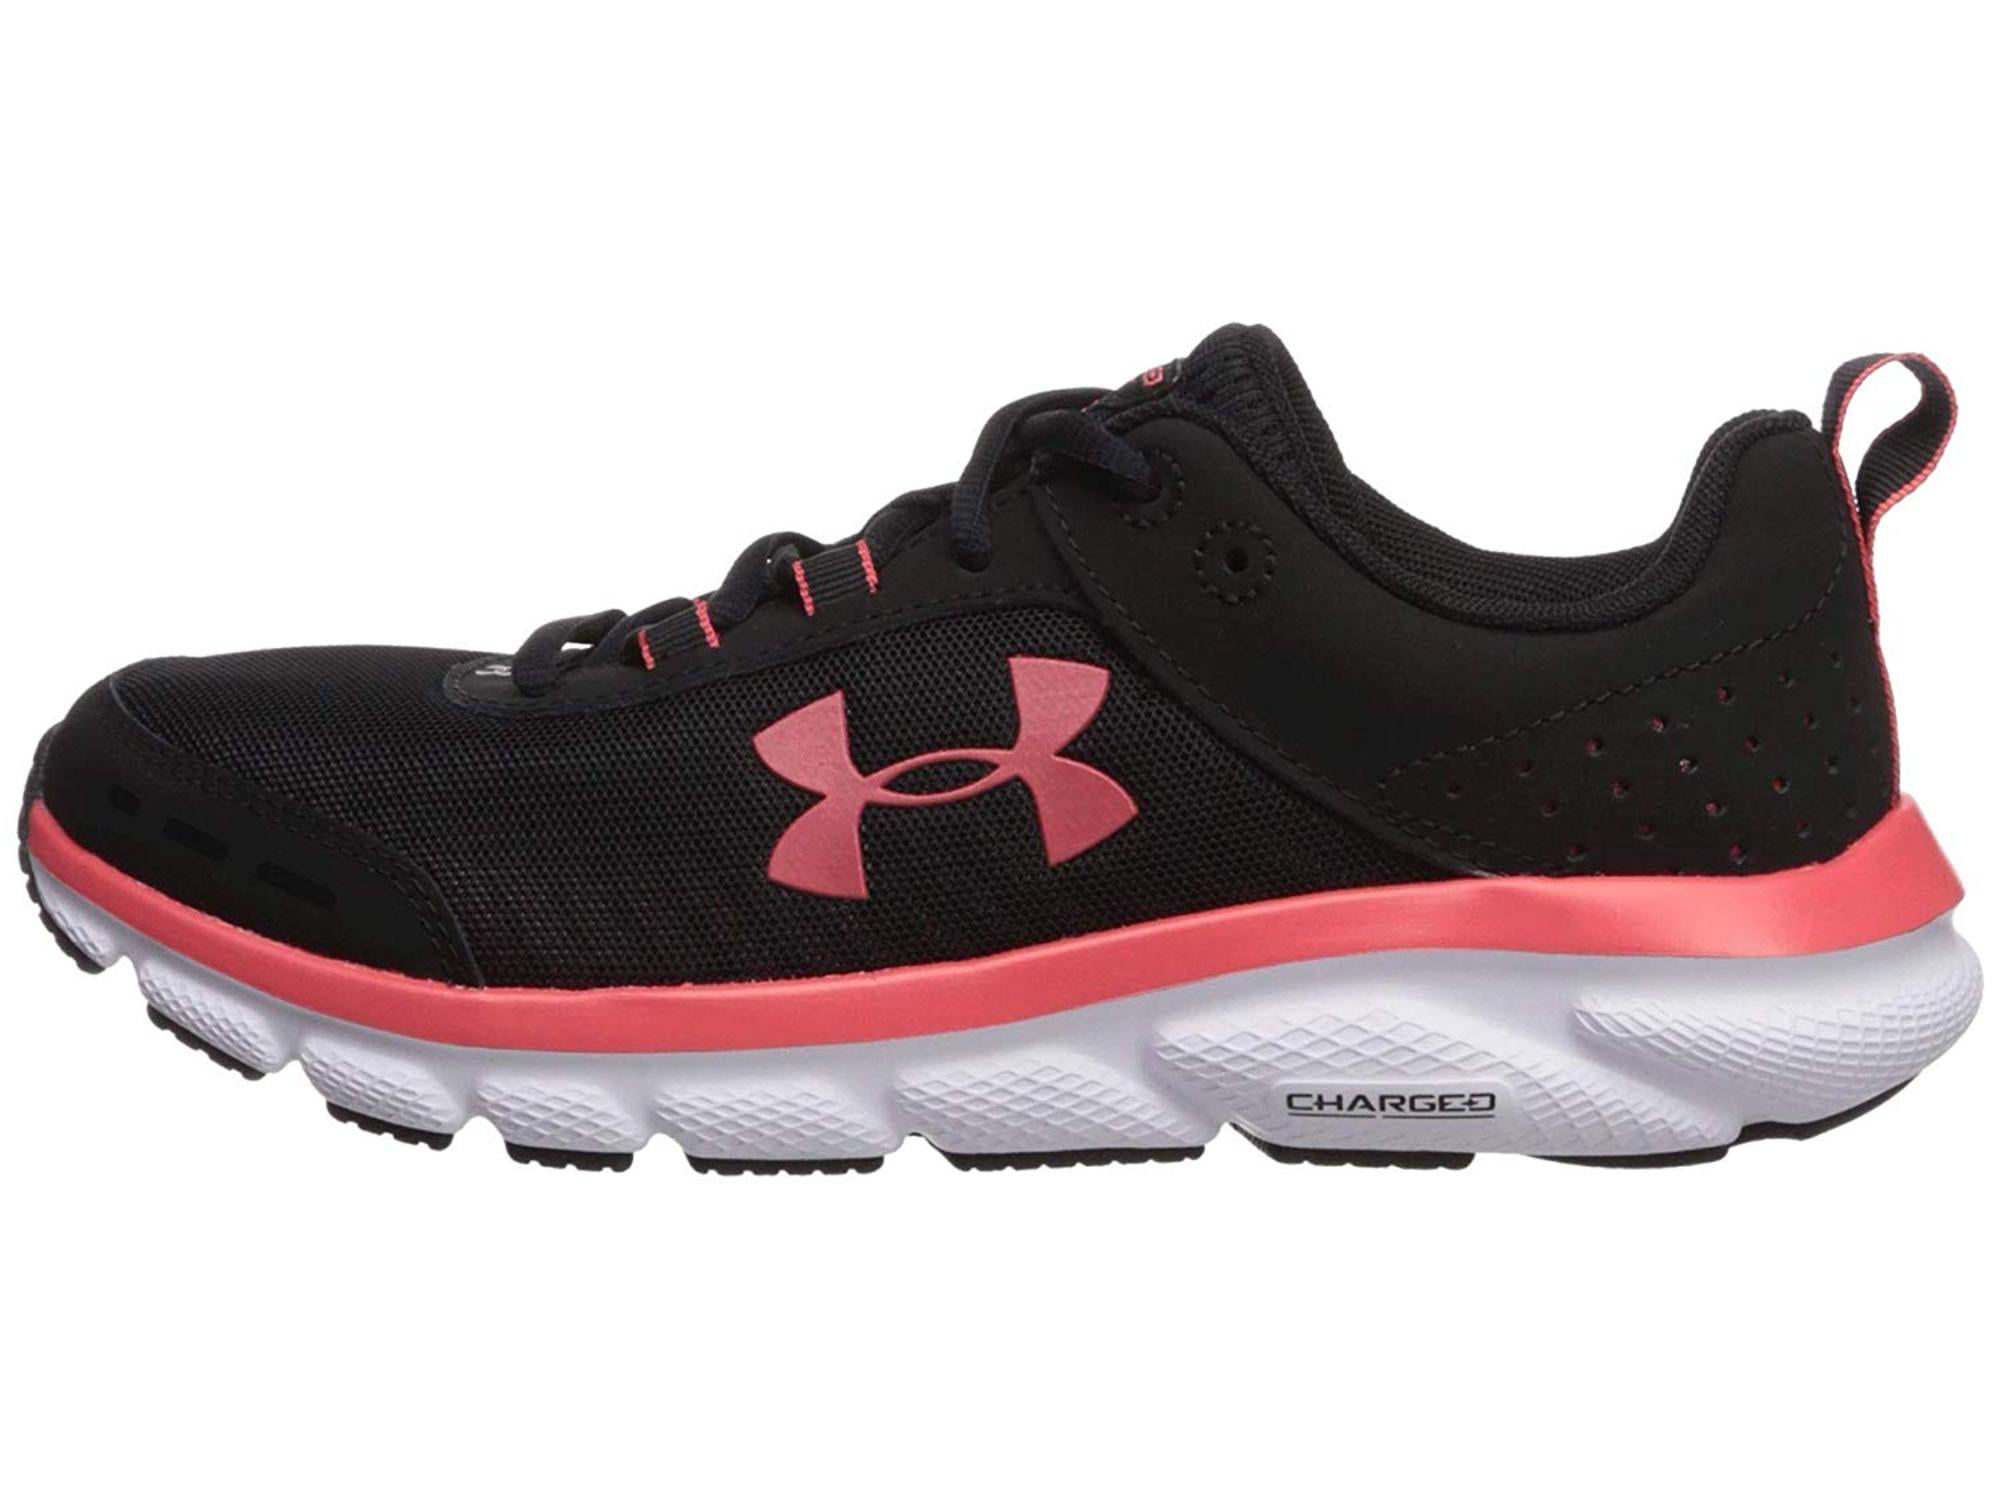 under armour womens running shoes